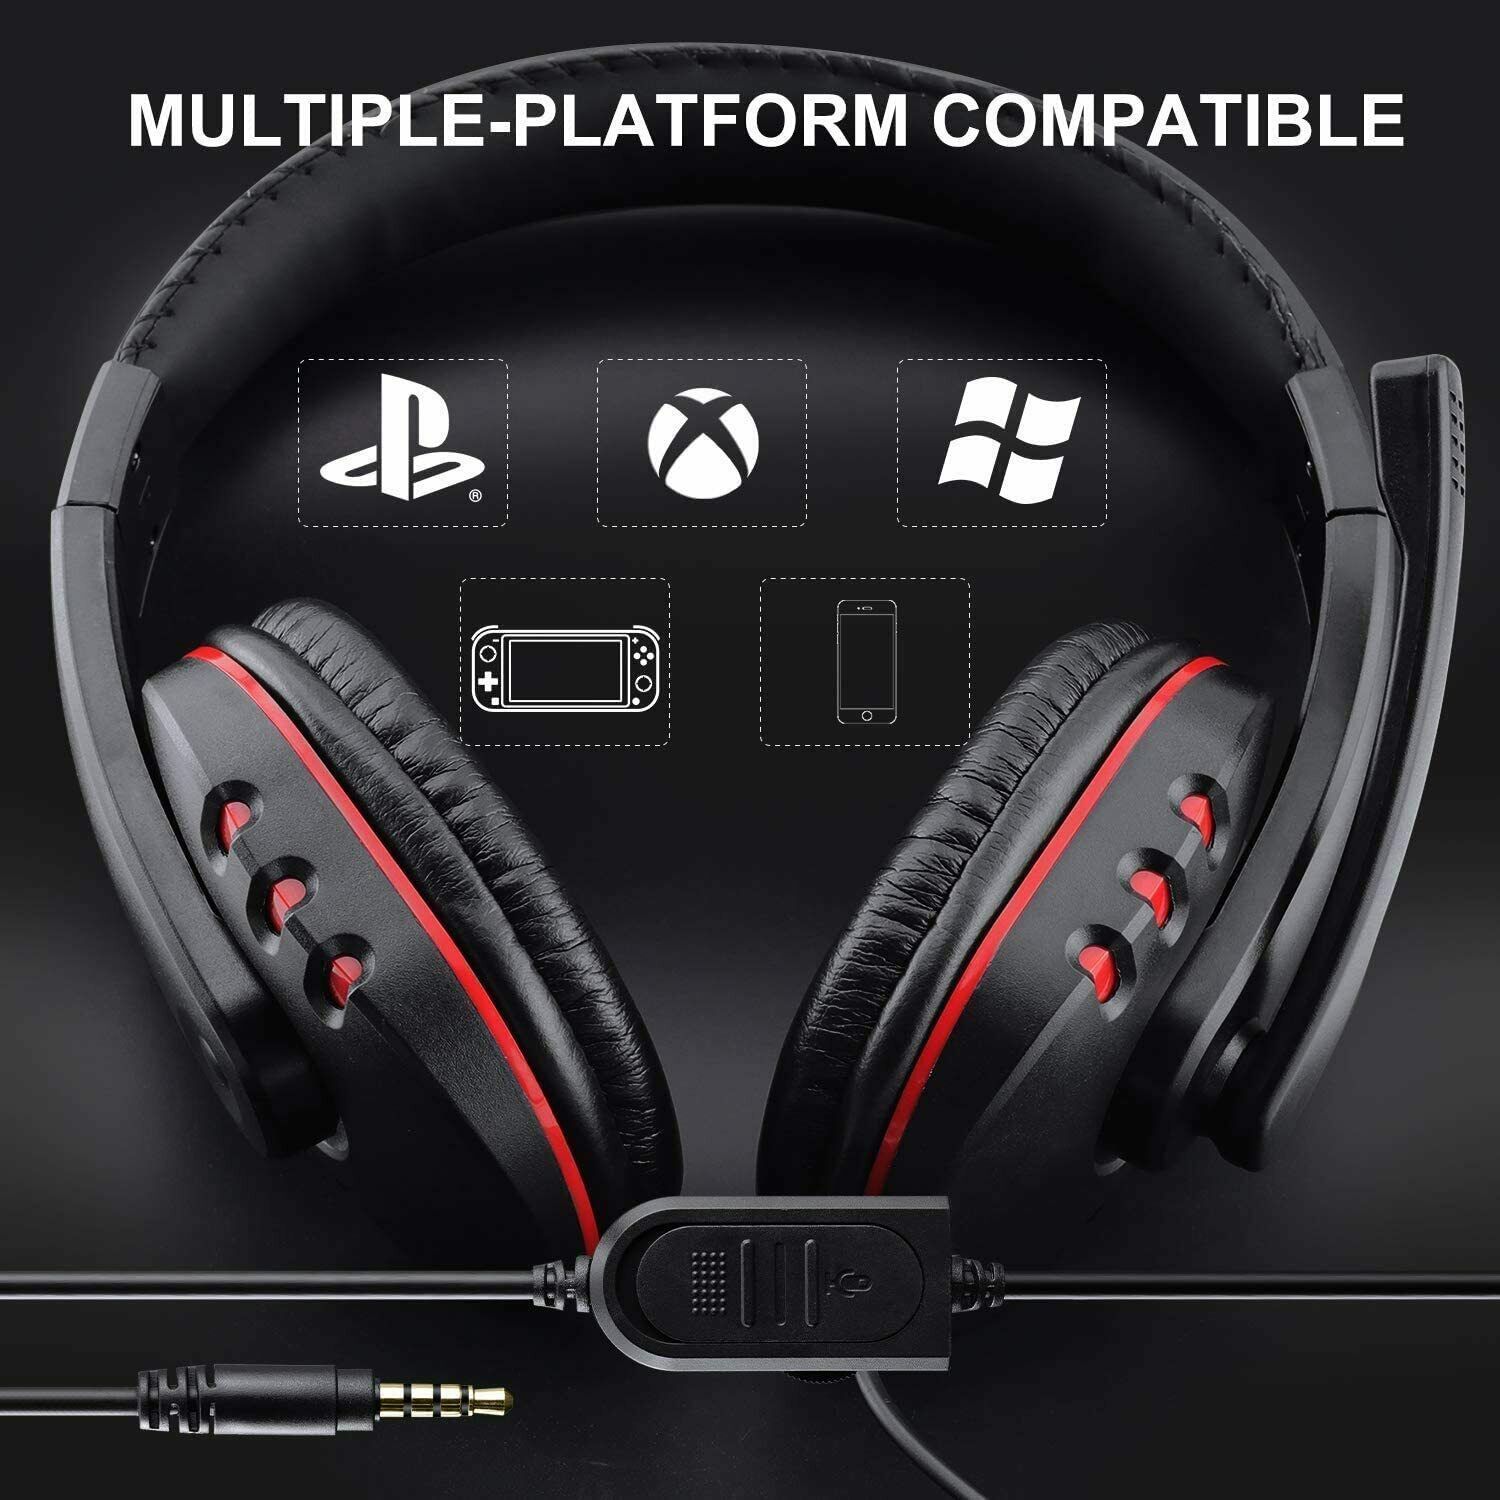 Headphones Pro Gamer Headset For PS4 PlayStation 4 PC Computer - Electronic Supreme